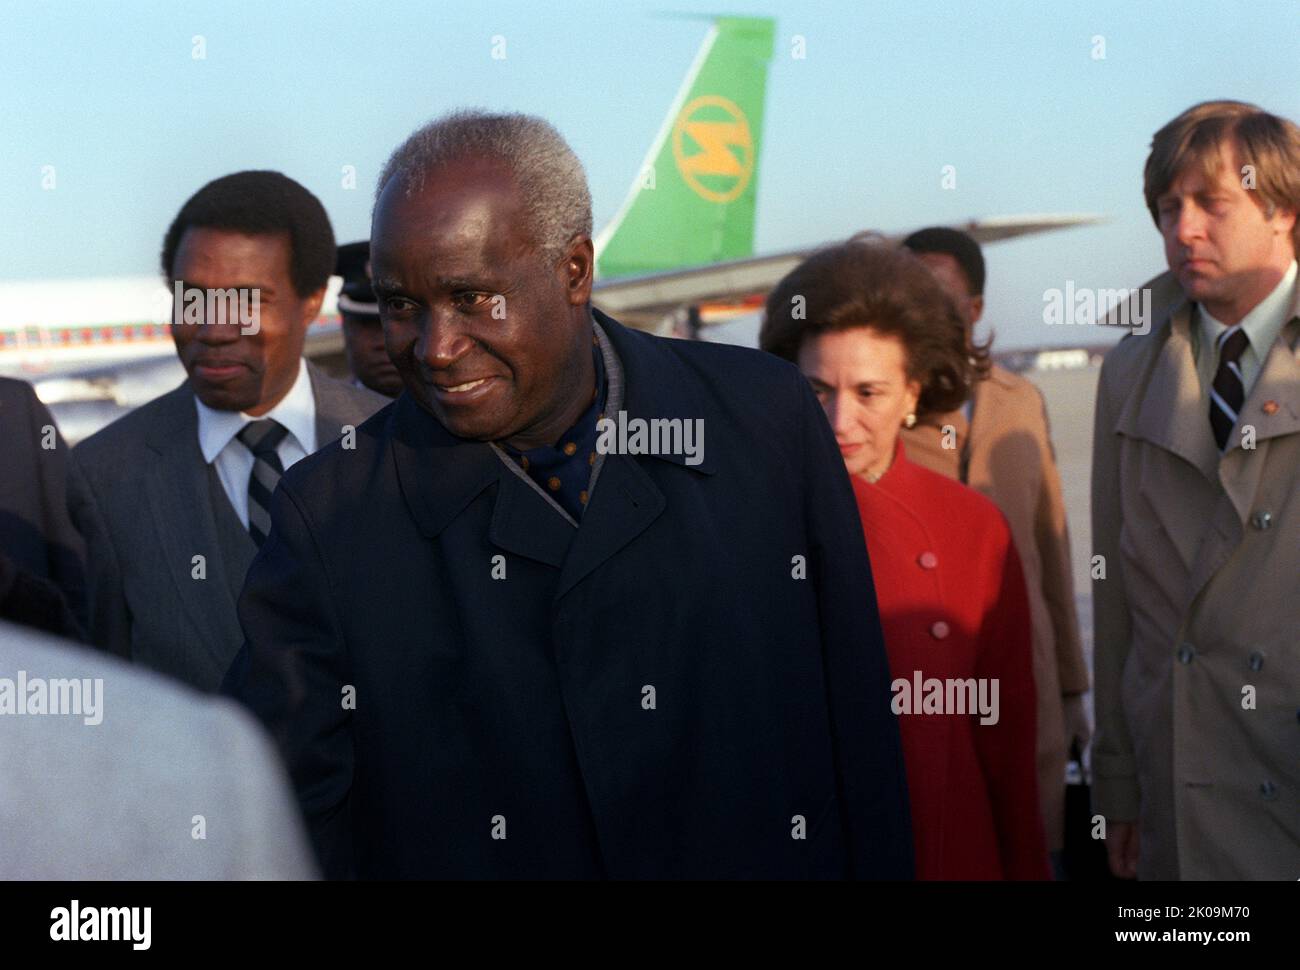 Kenneth David Kaunda (28 April 1924 - 17 June 2021), Zambian politician who served as the first president of Zambia from 1964 to 1991. He was at the forefront of the struggle for independence from British rule. Stock Photo